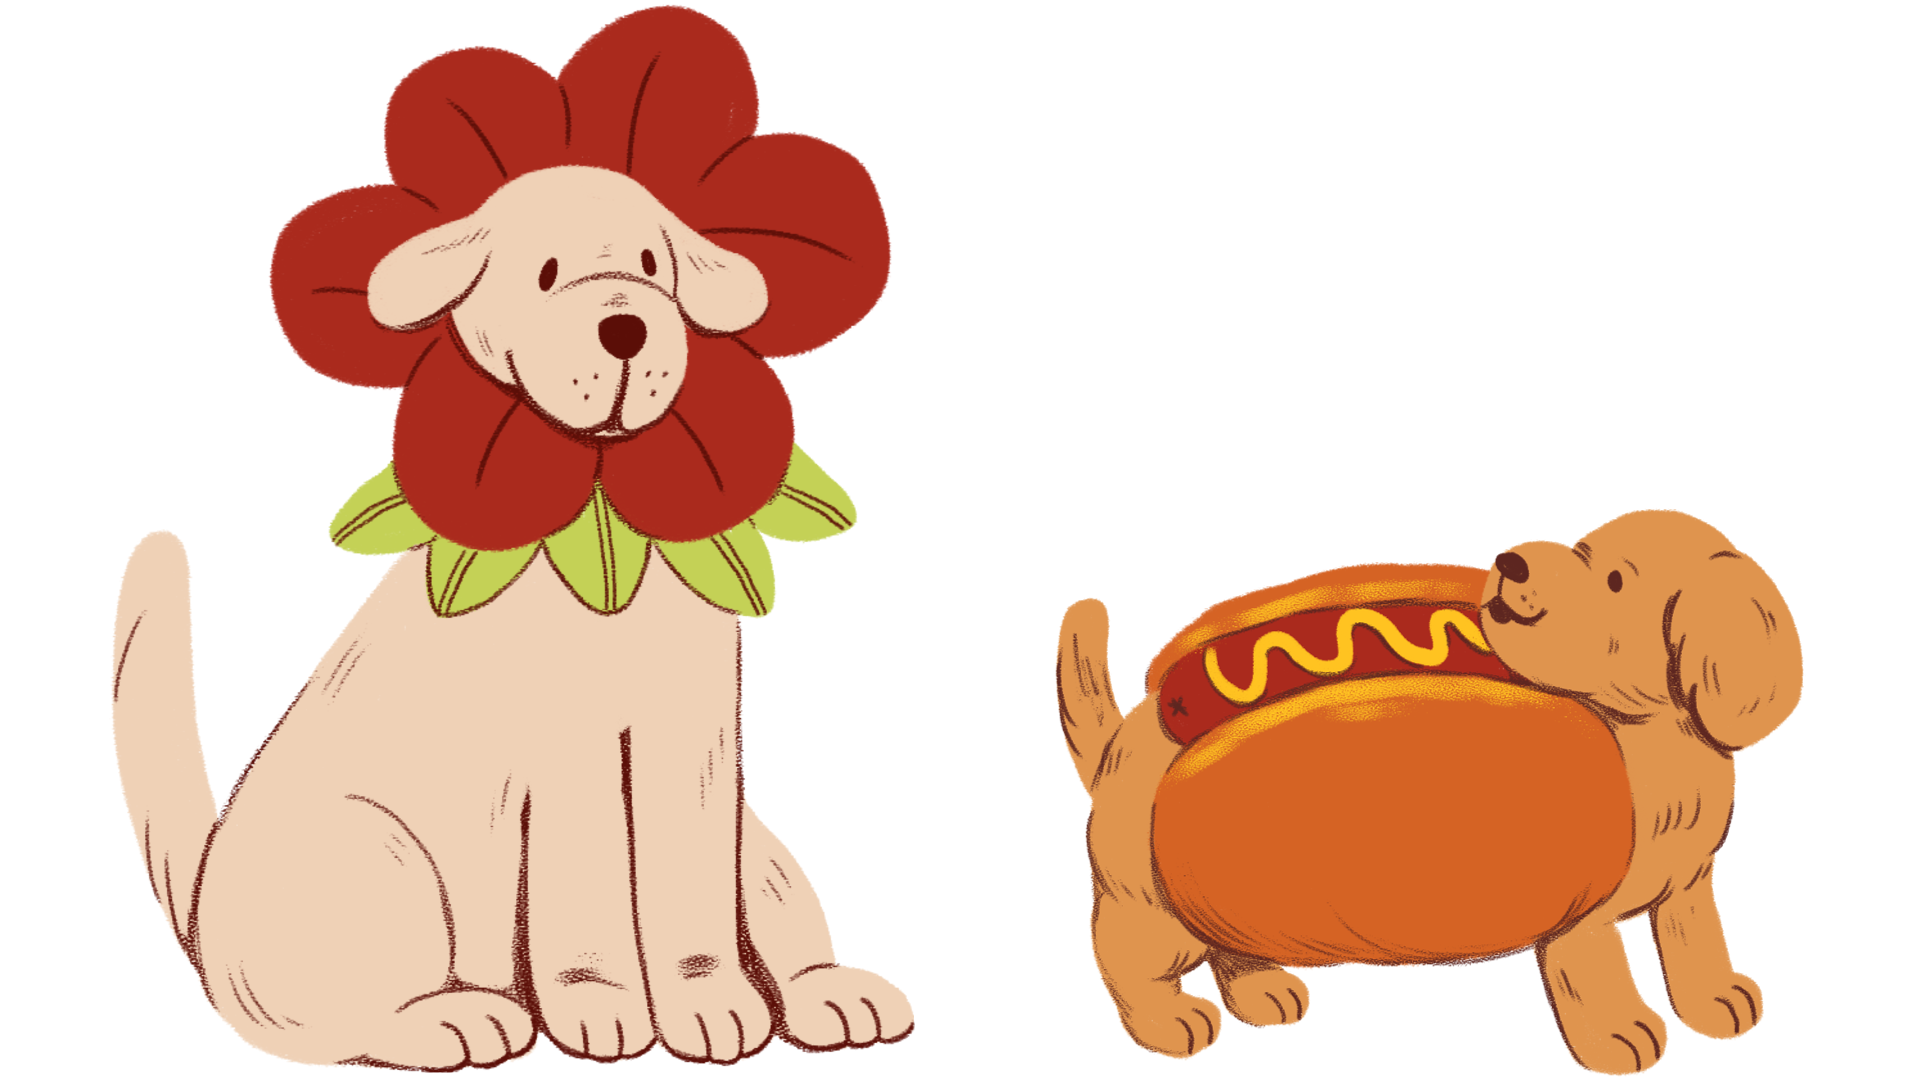 two cartoon dogs sit next to eachother, a bigger, lighter colored dog in a red flower costume, and a smaller orange dog in a hotdog costume.